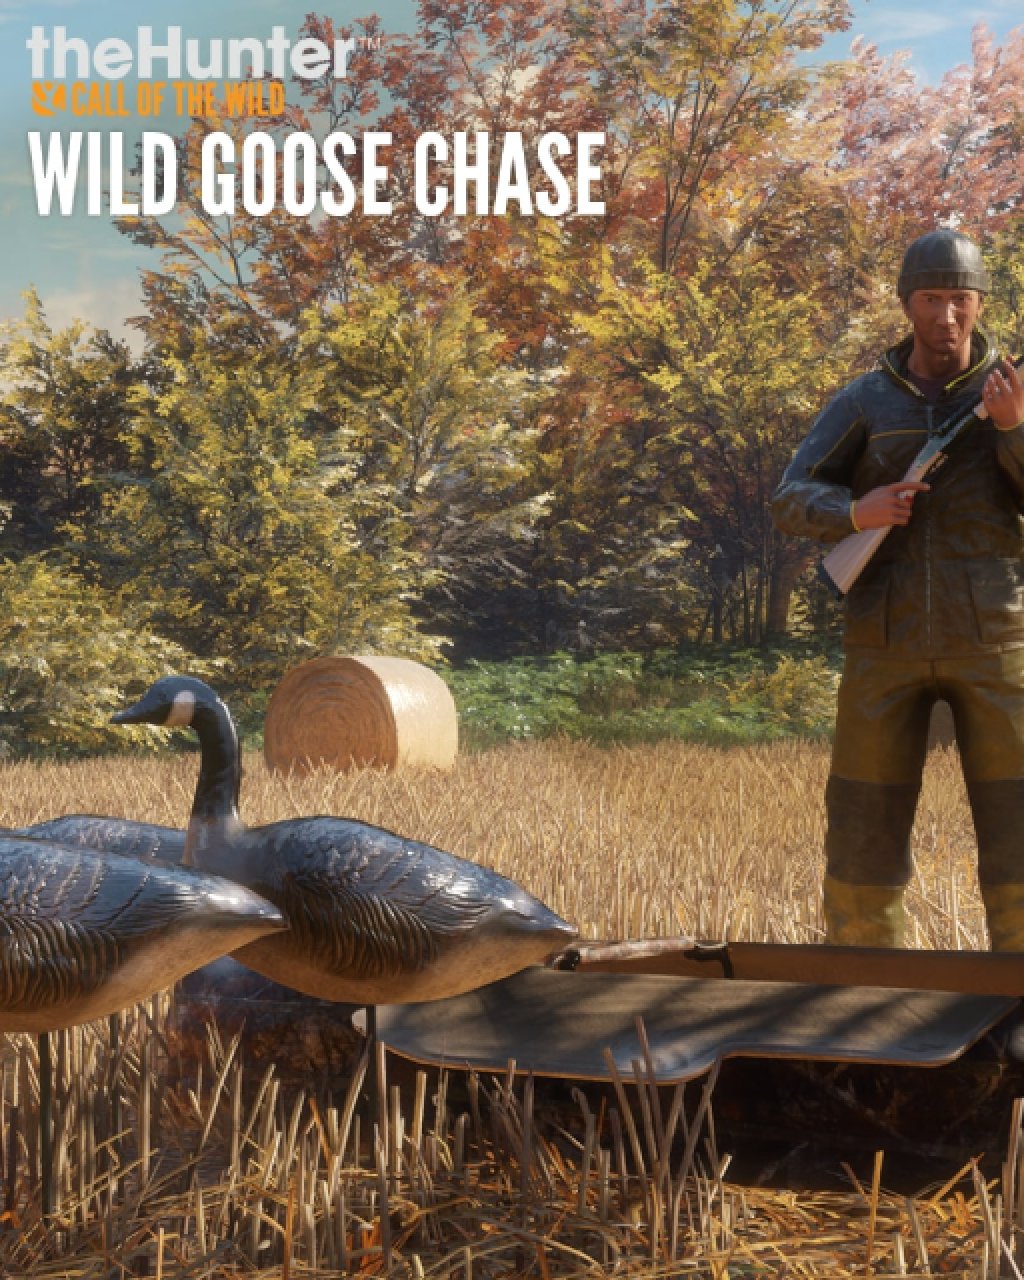 theHunter Call of the Wild Wild Goose Chase Gear